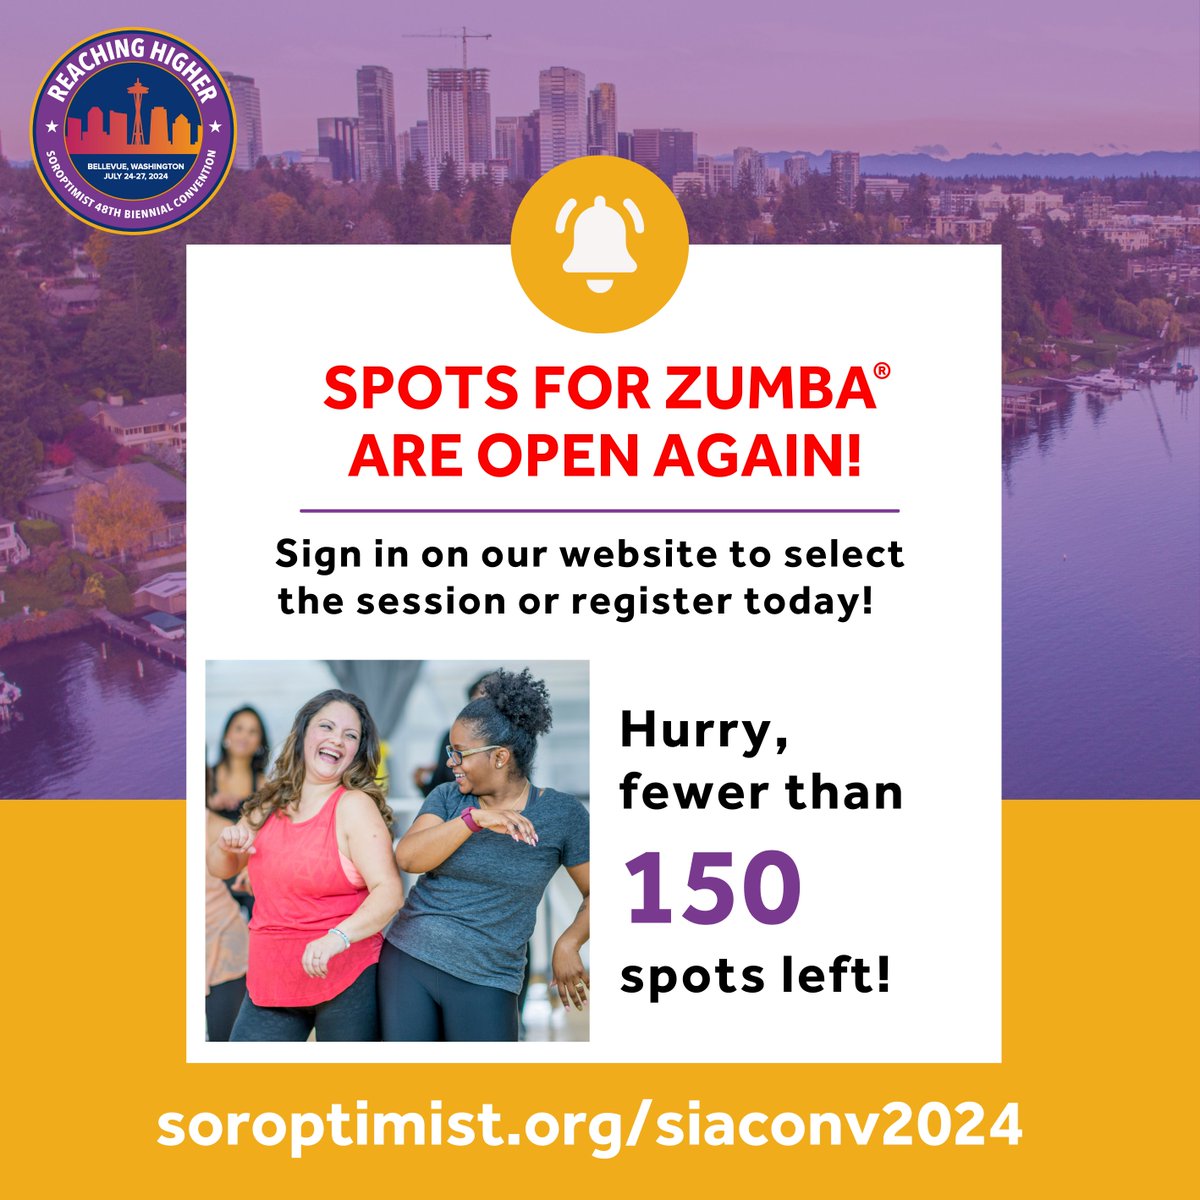 🚨 SPOTS FOR ZUMBA ARE OPEN AGAIN! Sign in on our website to select the session or register today, fewer than 150 spots are left! soroptimist.org/siaconv2024